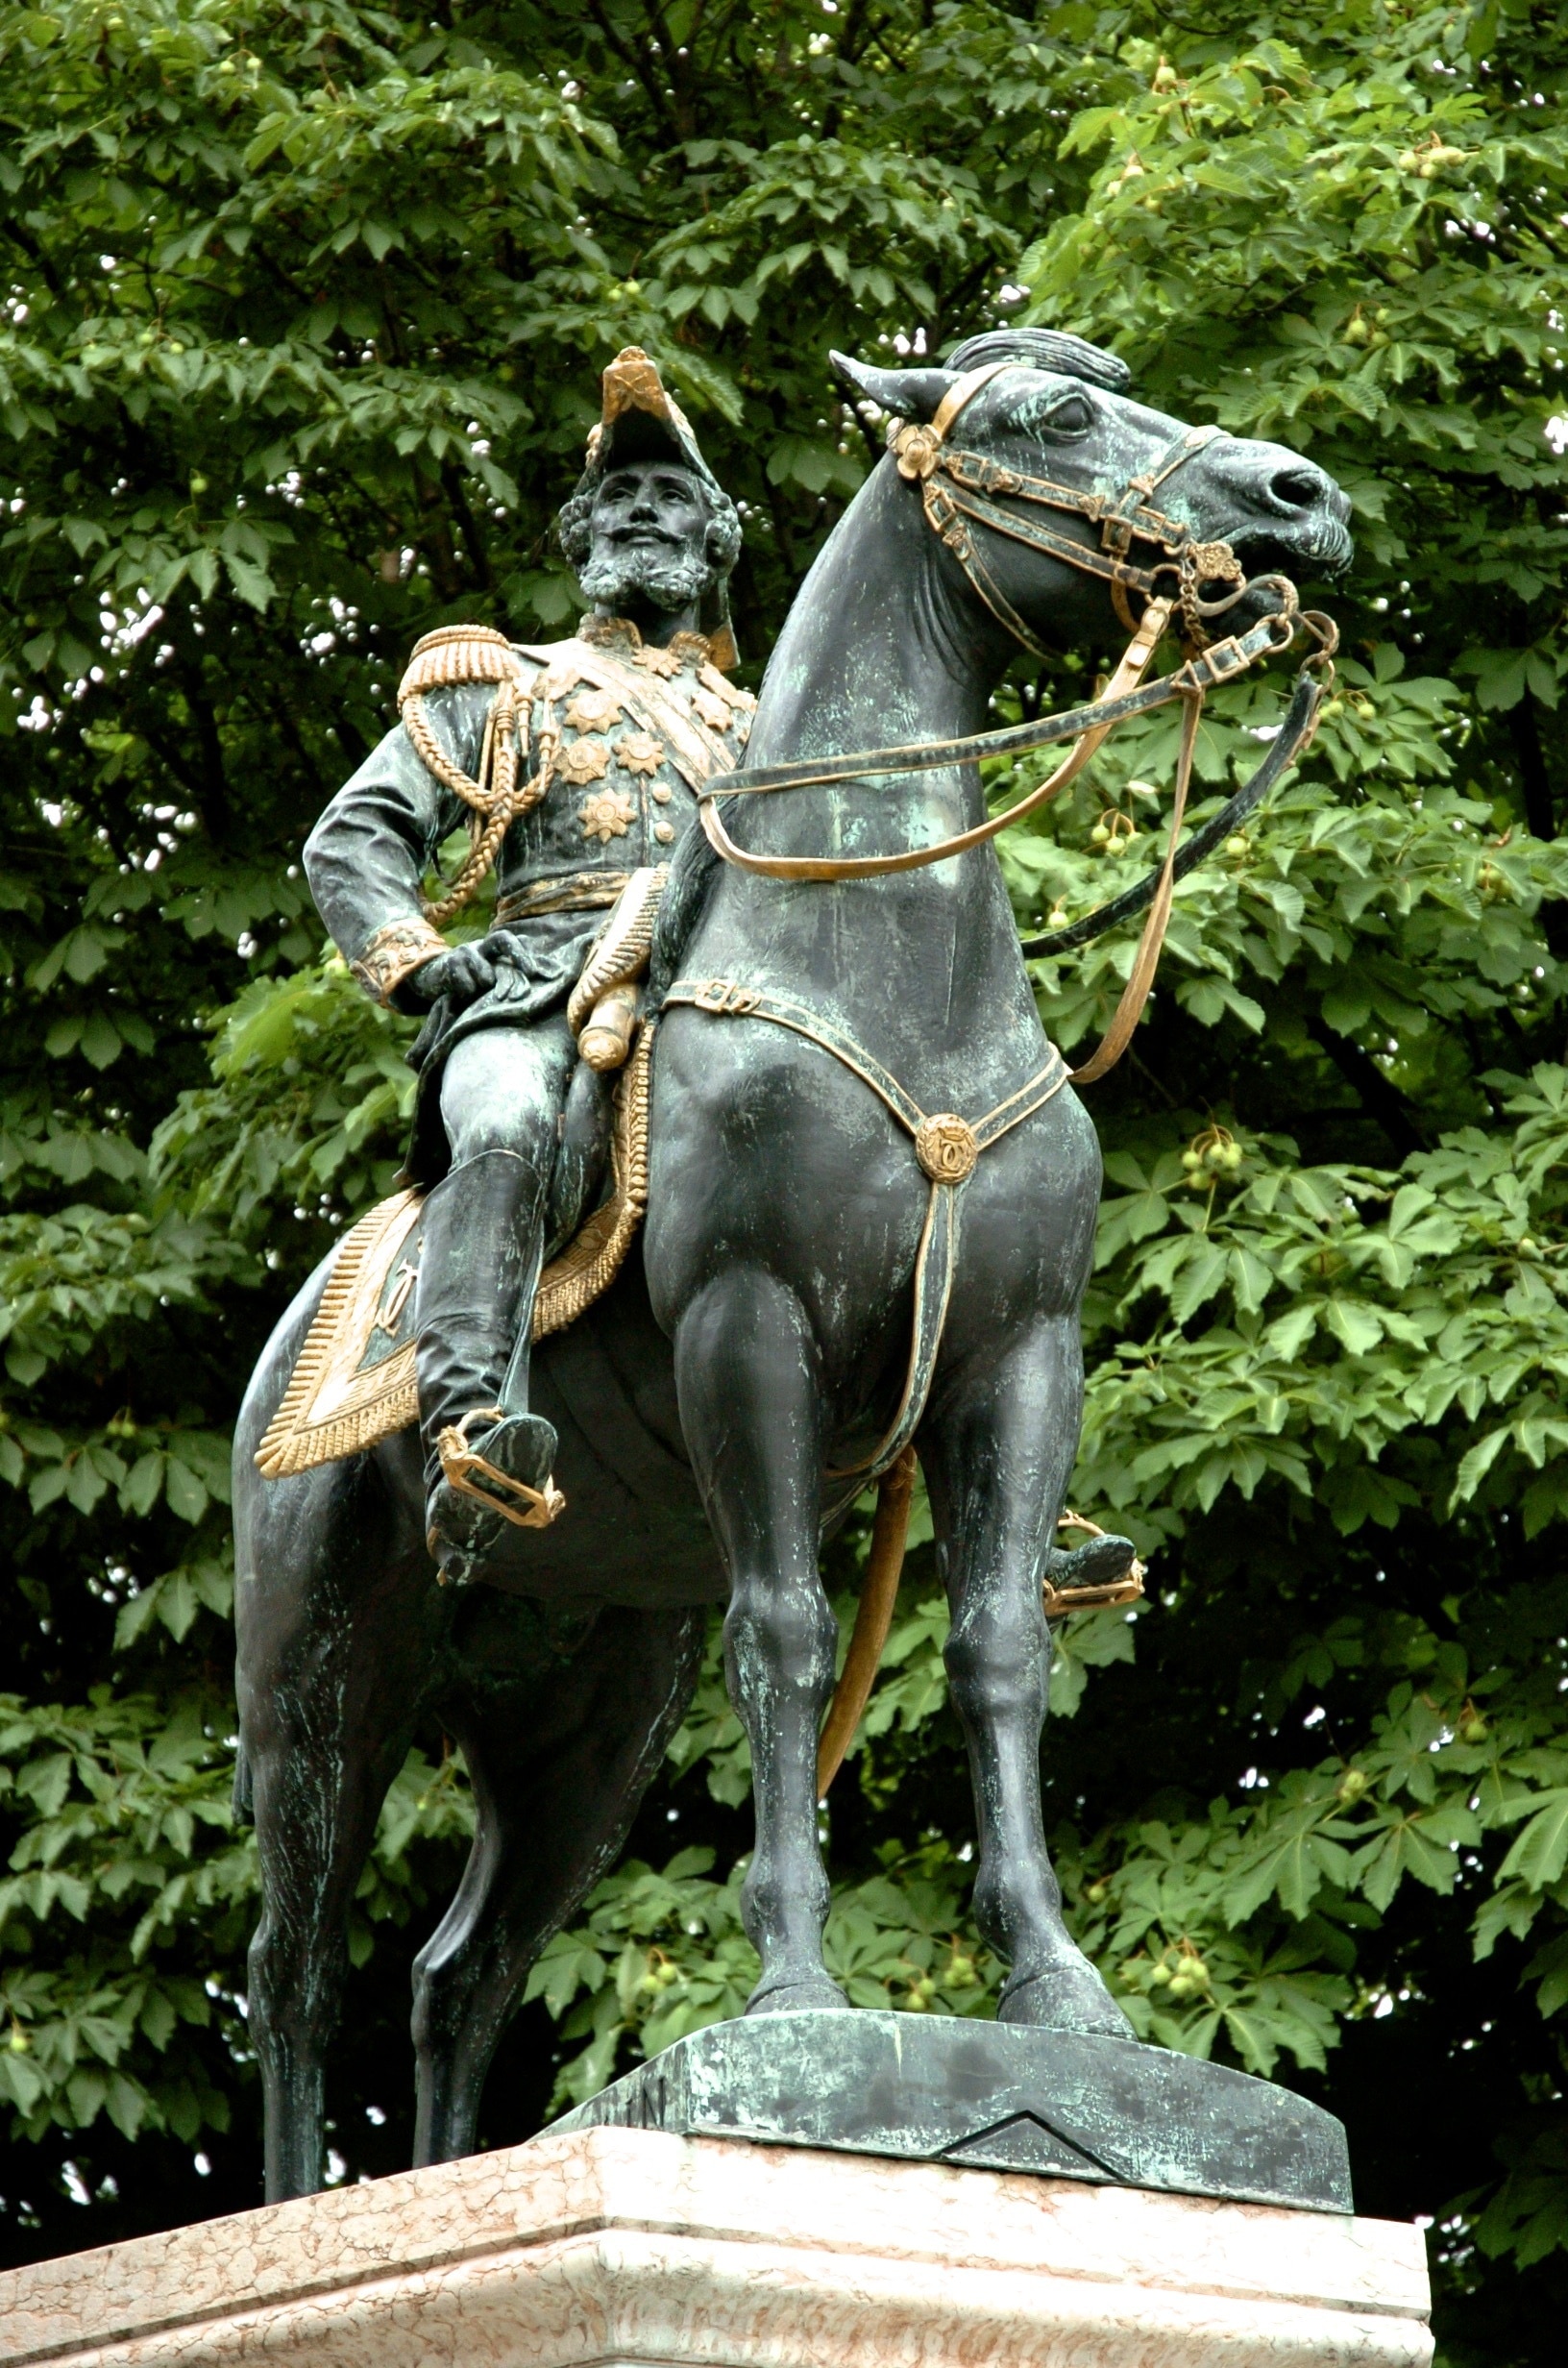 Duke of Brunswick Charles II.  The Brunswick Monument is a mausoleum built in 1879 in Geneva, Switzerland to commemorate the life of Charles II, Duke of Brunswick (1804–1873). He bequeathed his fortune to the city of Geneva in exchange for a monument to be built in his name, specifying that it be a replica of the Scaliger Tombs in Verona, Italy.